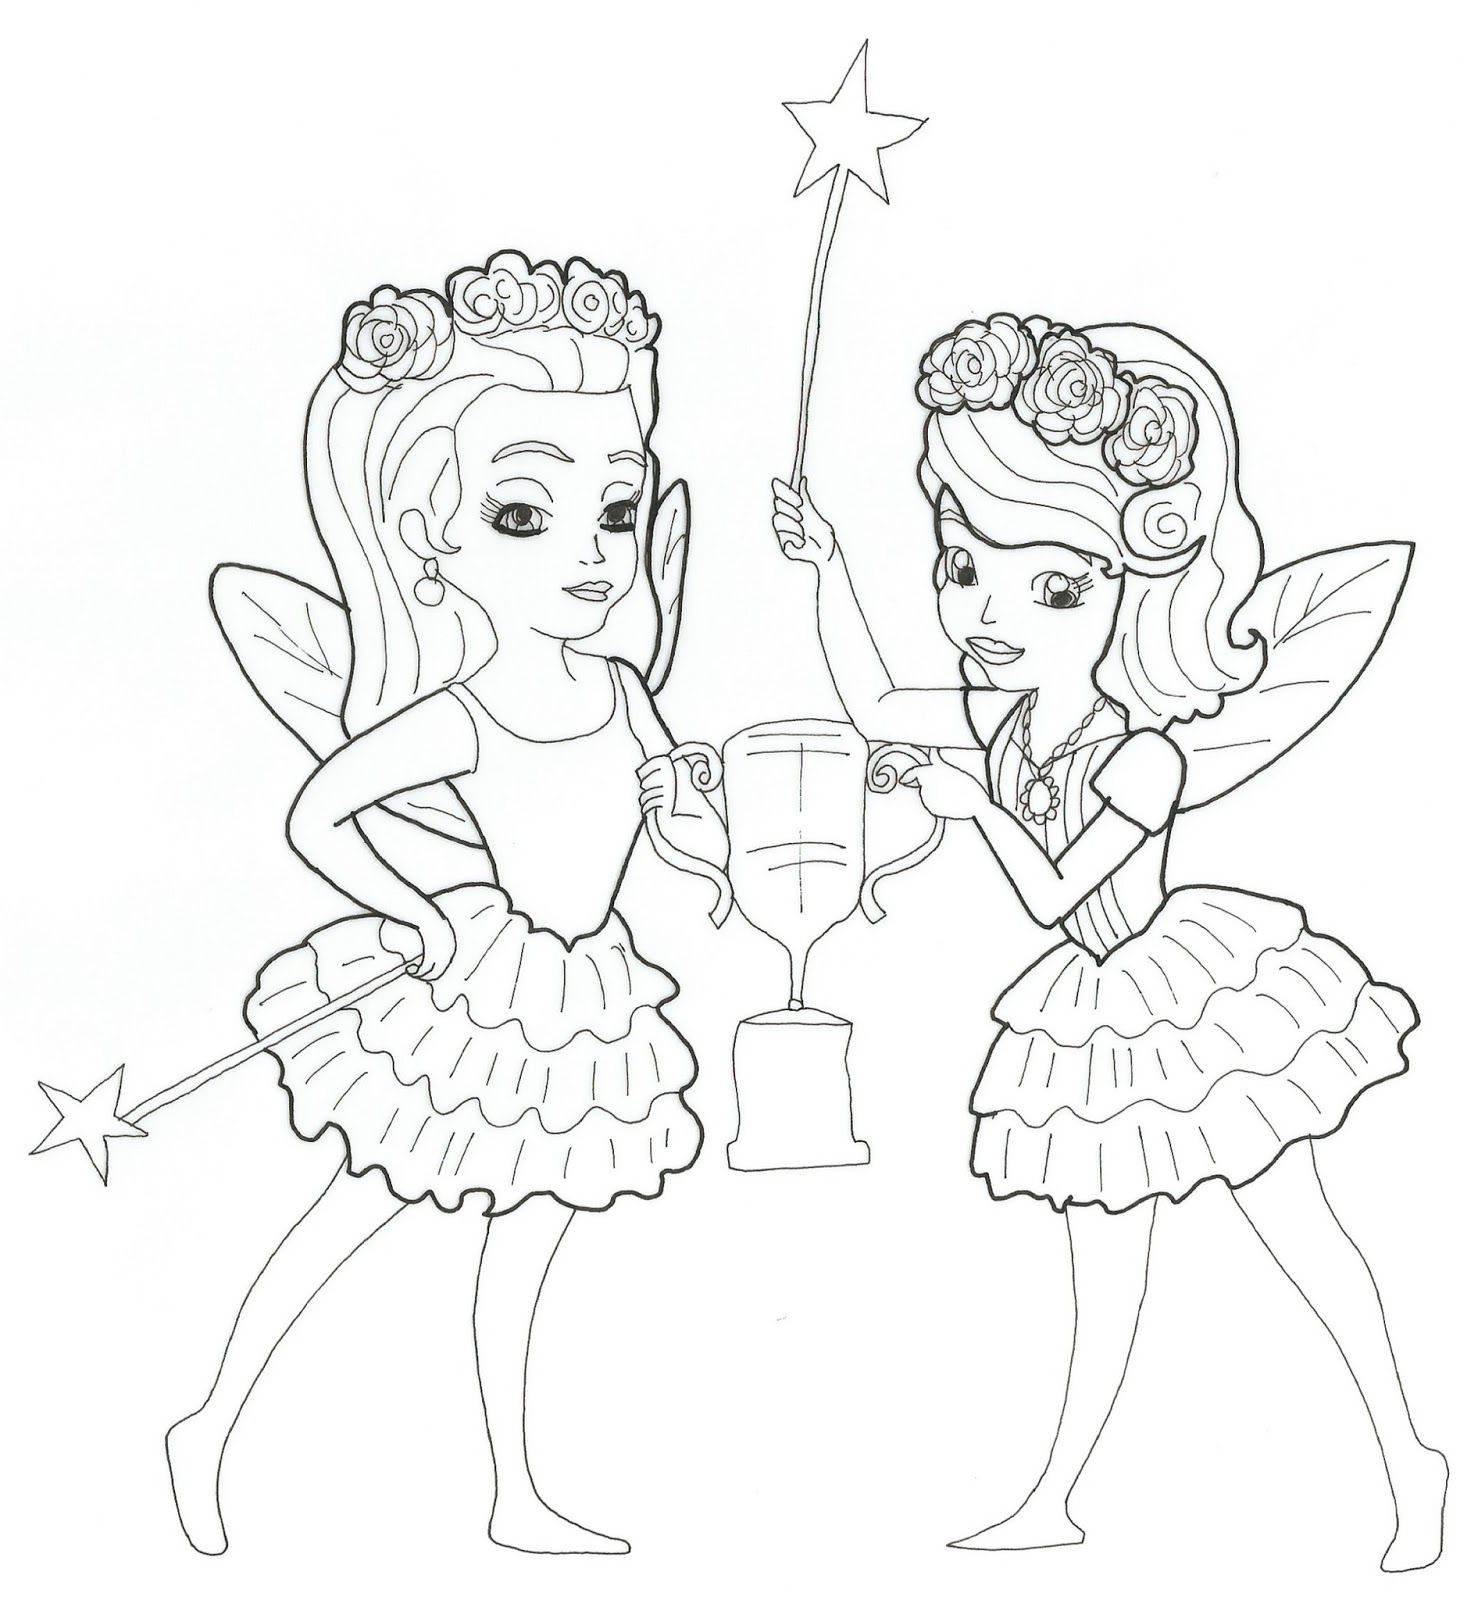 coloring pages for princess sofia